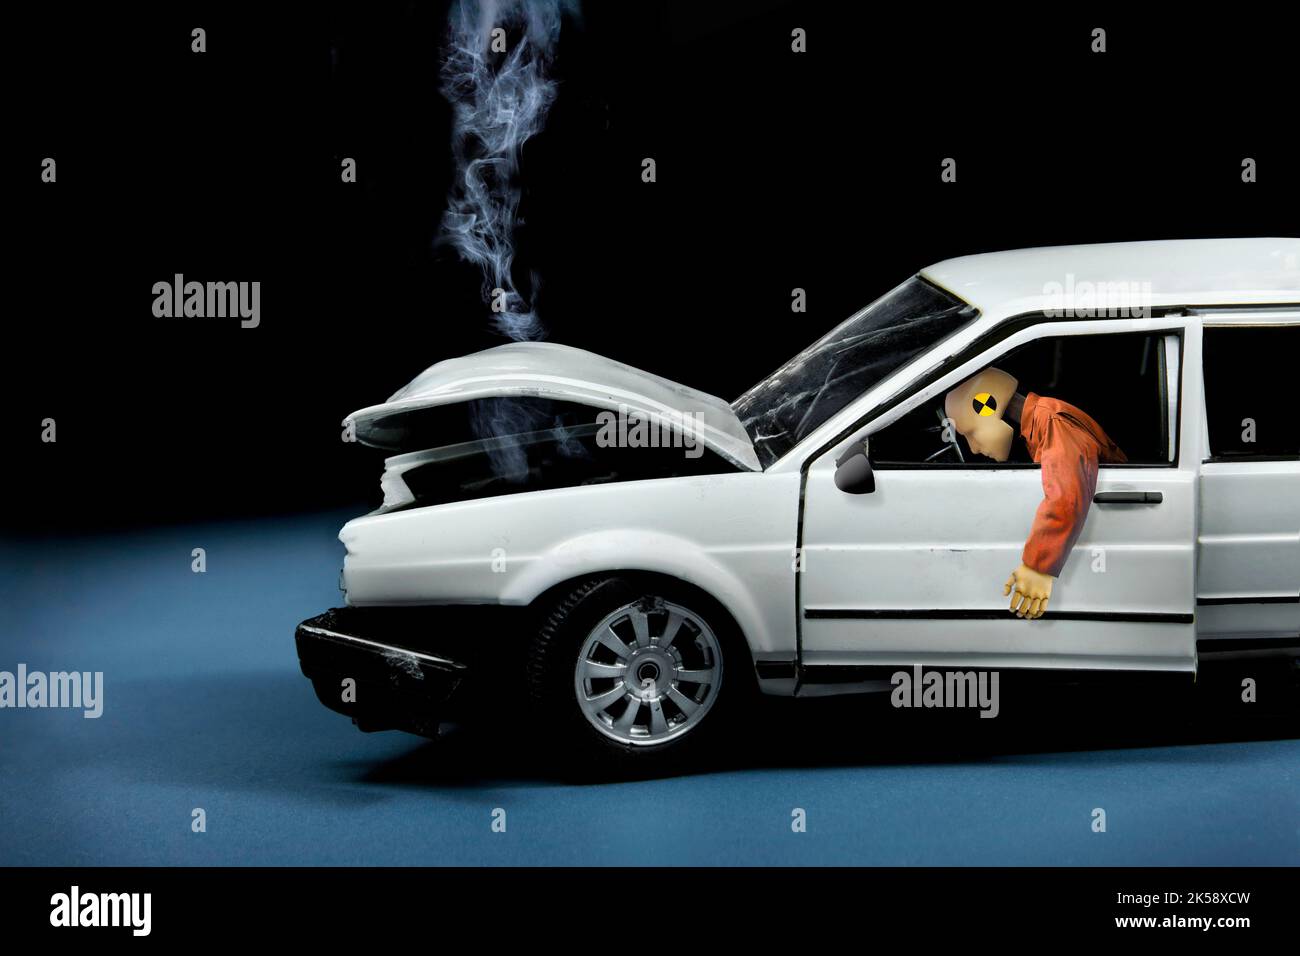 Crash test accident with dummy in model car Stock Photo